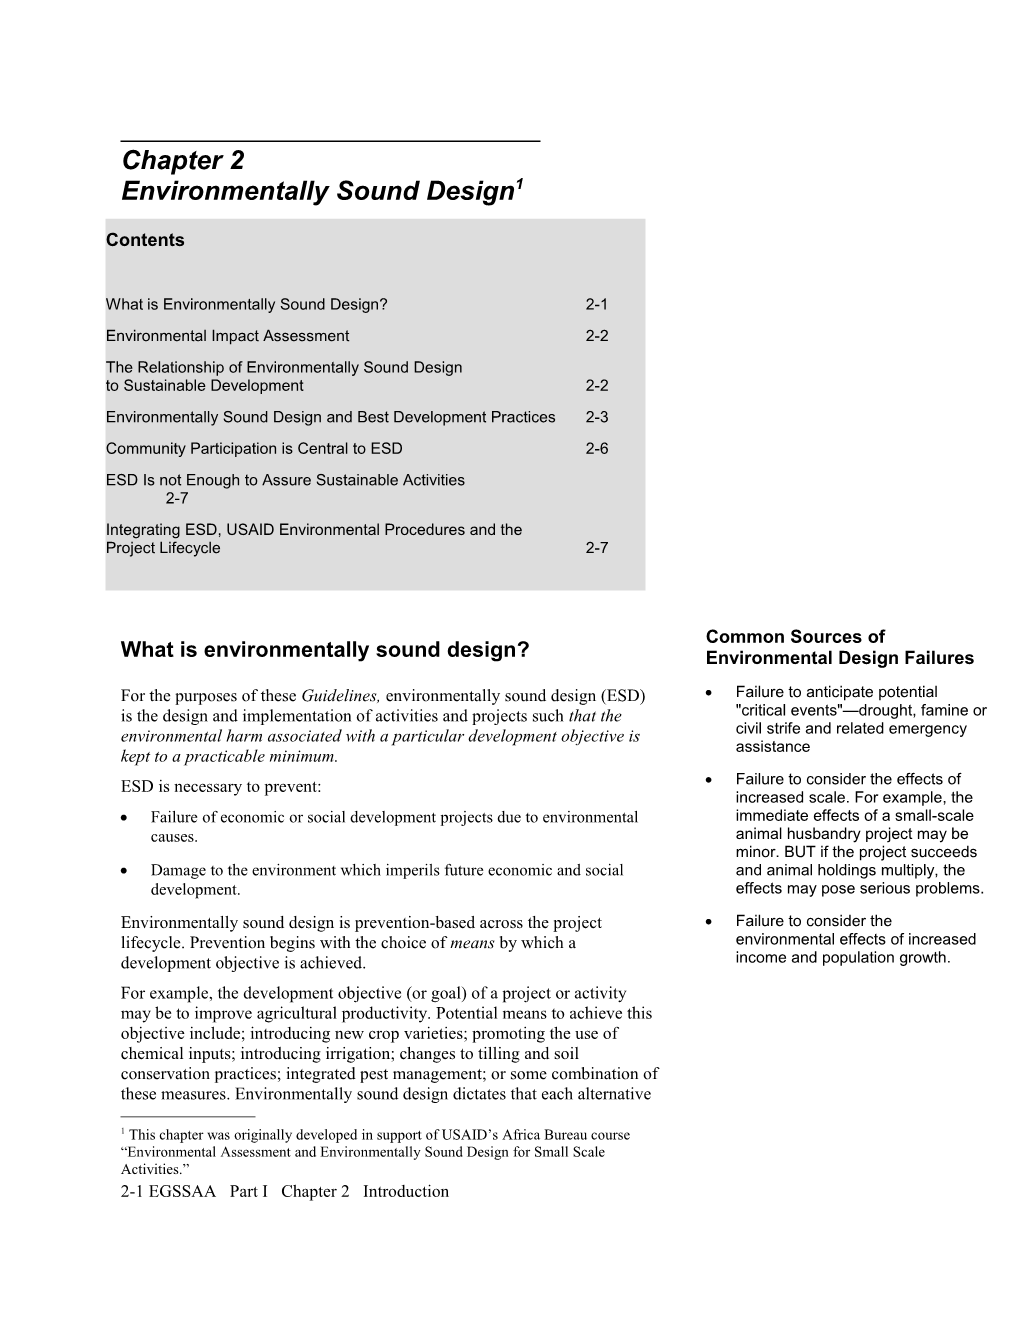 What Is Environmentally Sound Design?